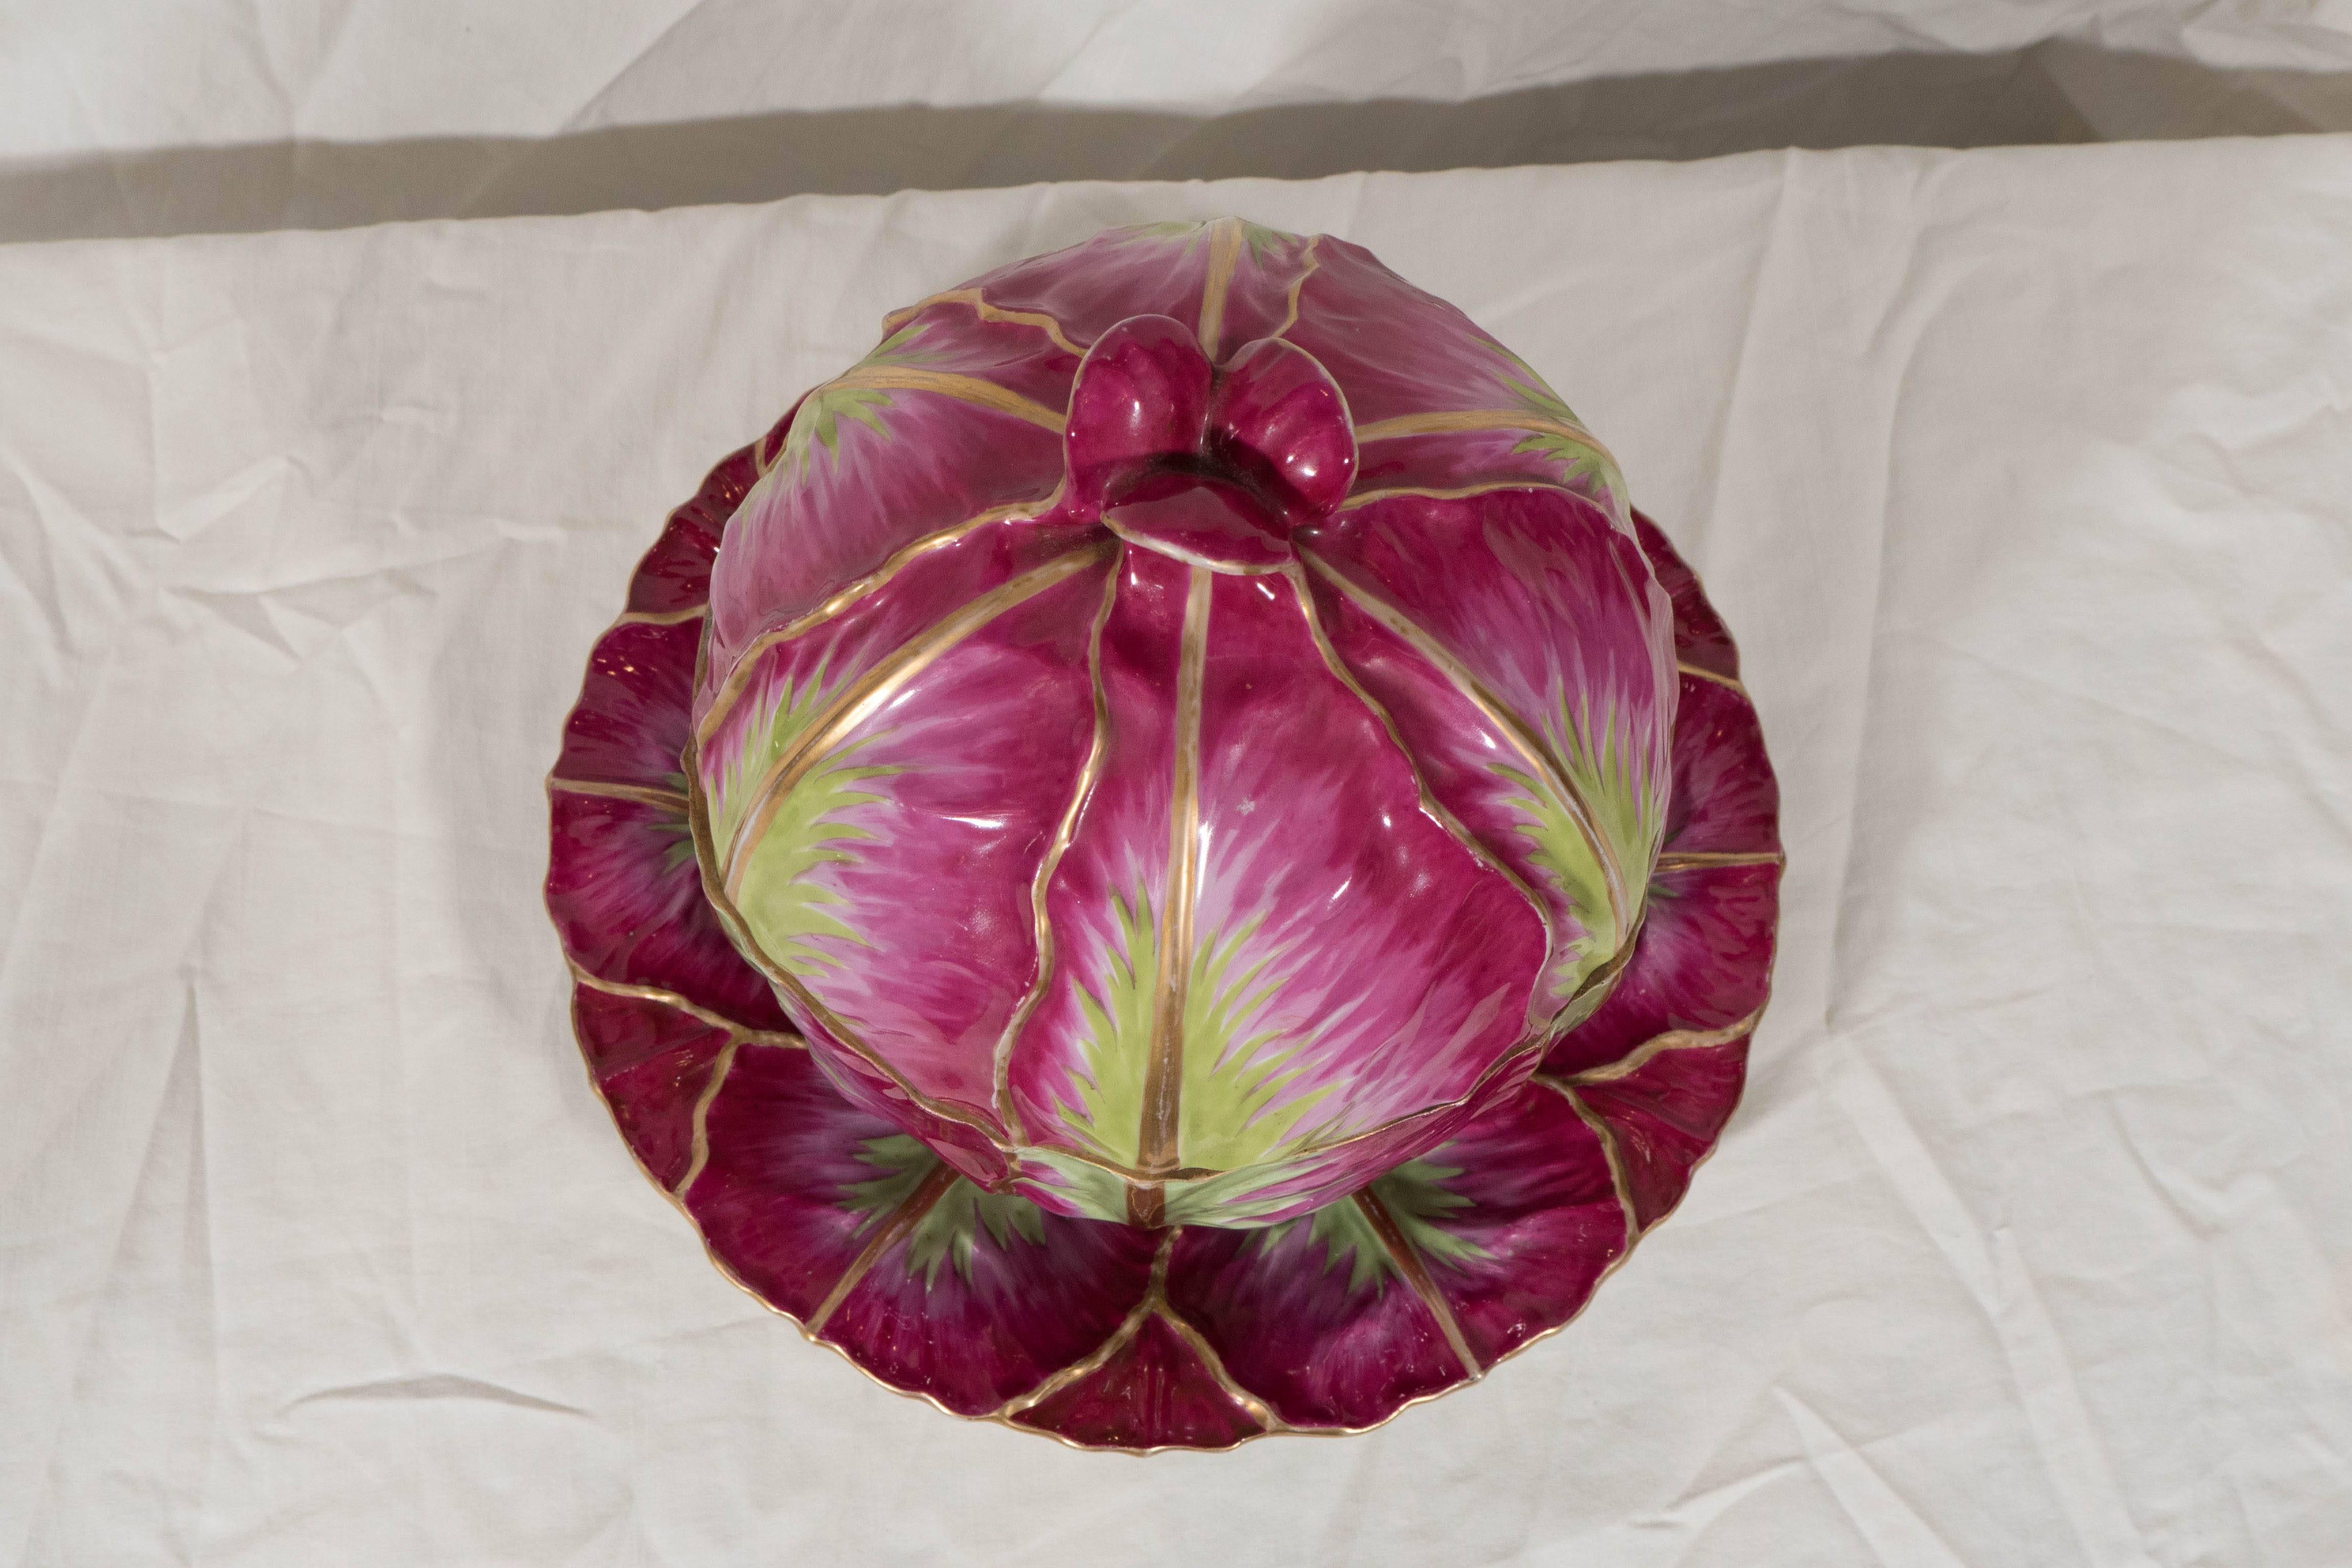 Early 19th Century Meissen Cabbage Tureen Painted in Fuchsia and Green 1